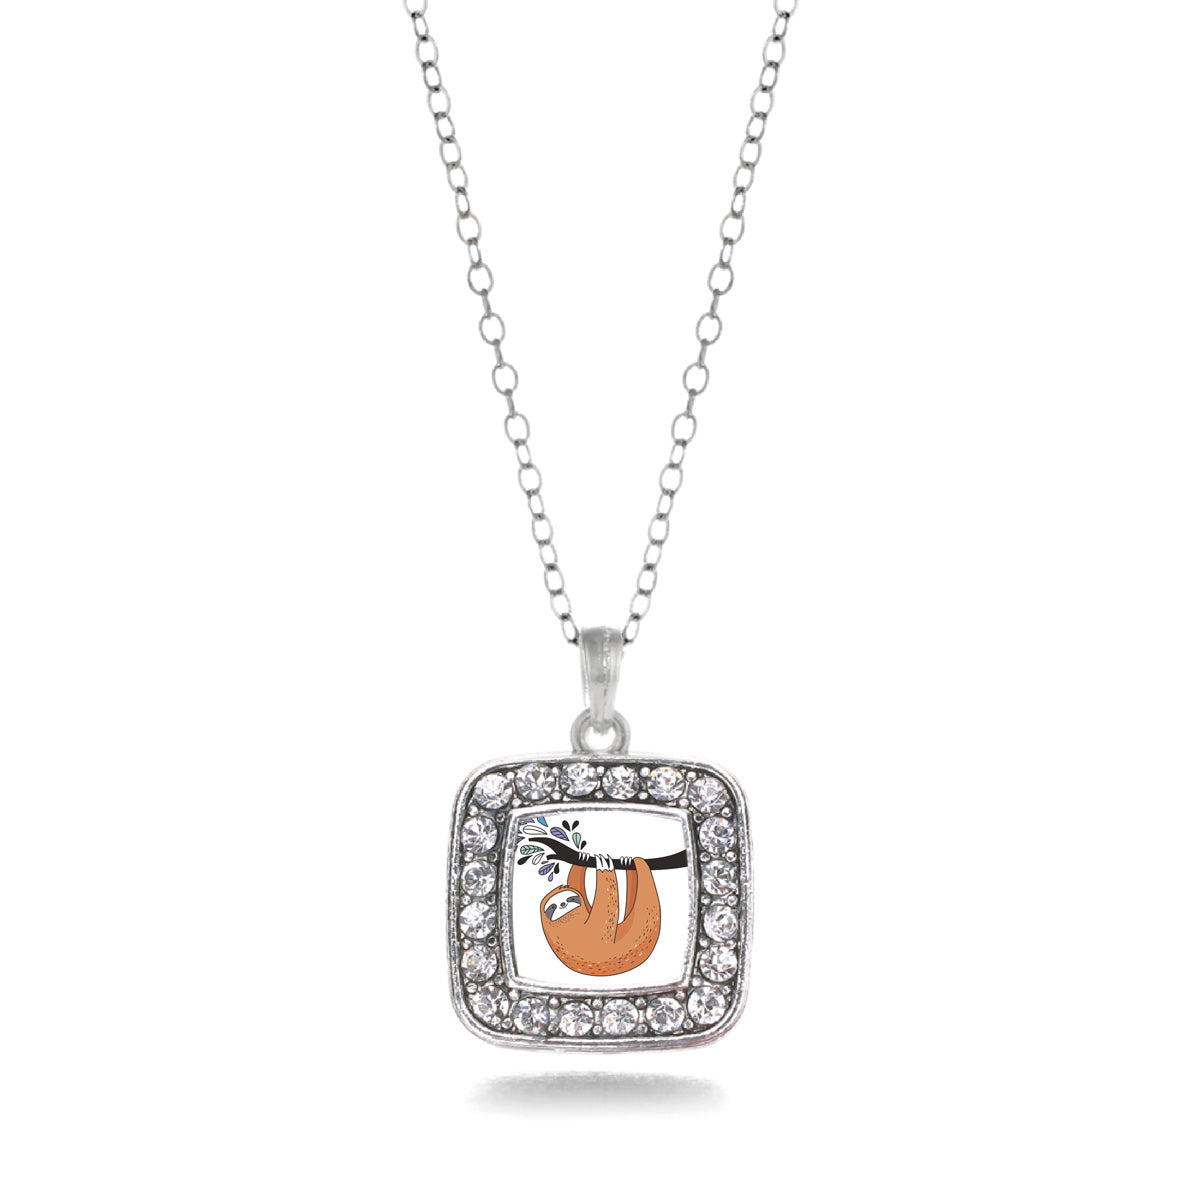 Silver Sloth Square Charm Classic Necklace